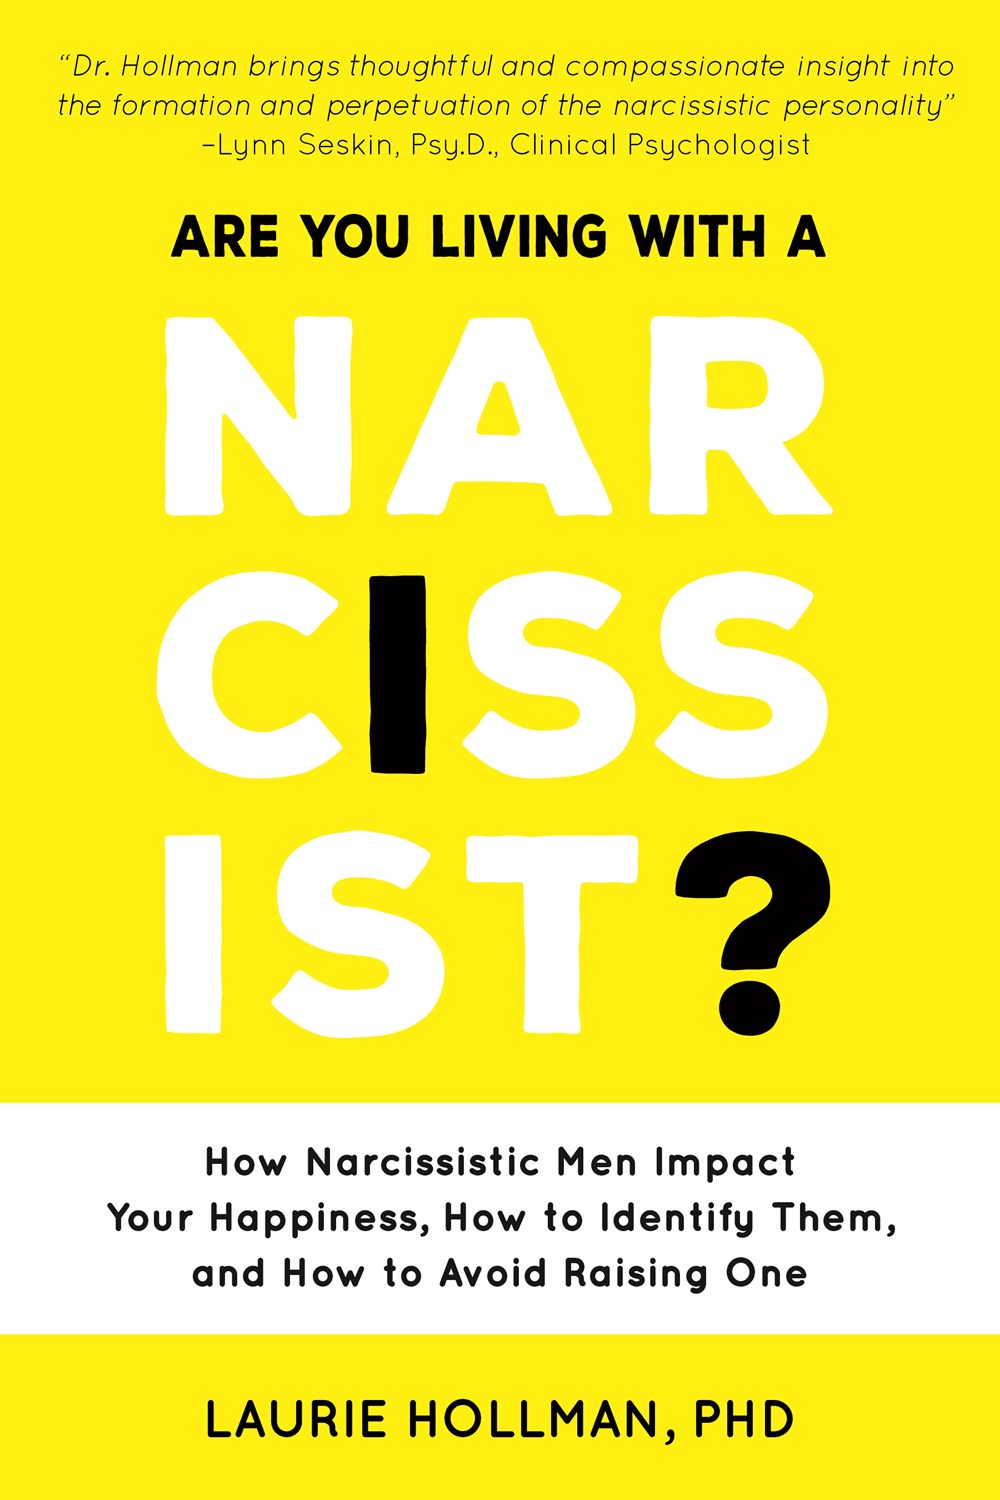 Are You Living with a Narcissist?